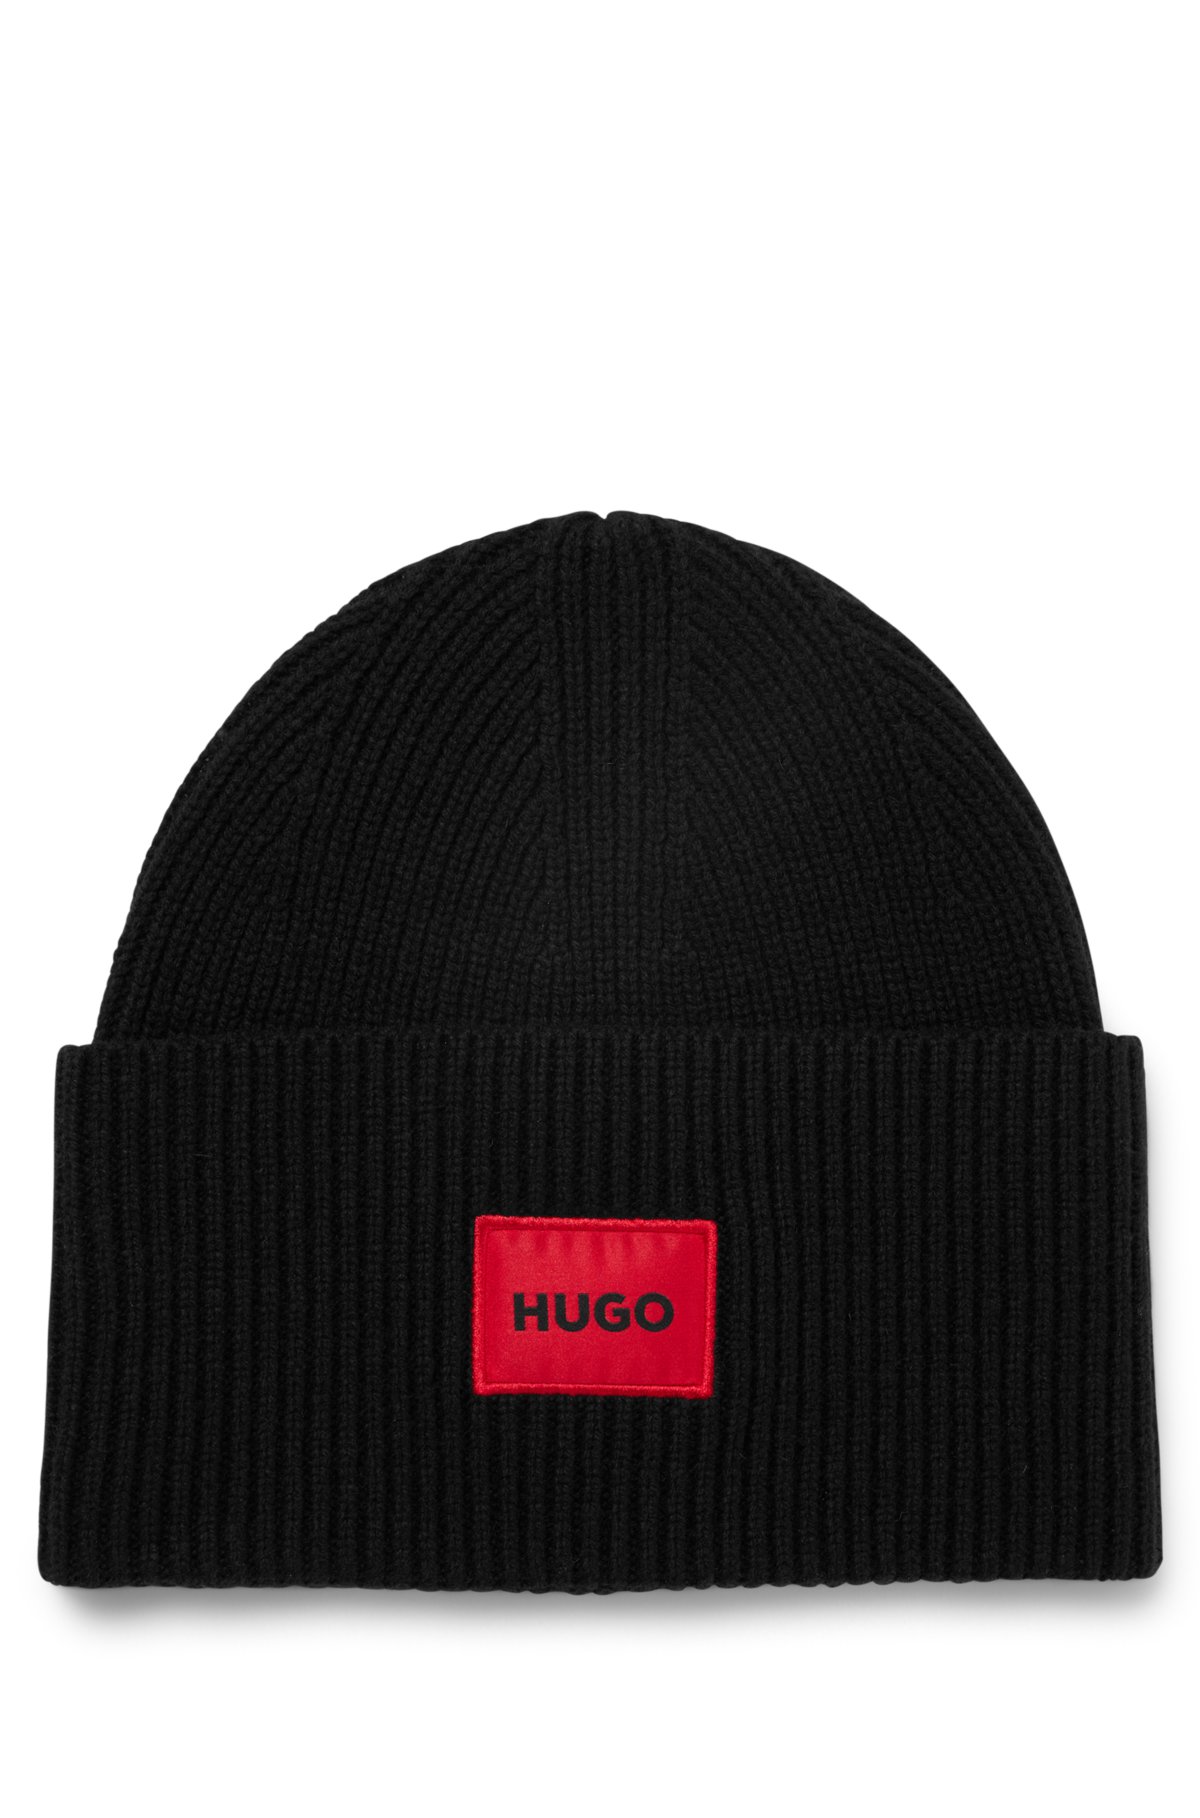 Wool-blend beanie HUGO hat logo with red - label